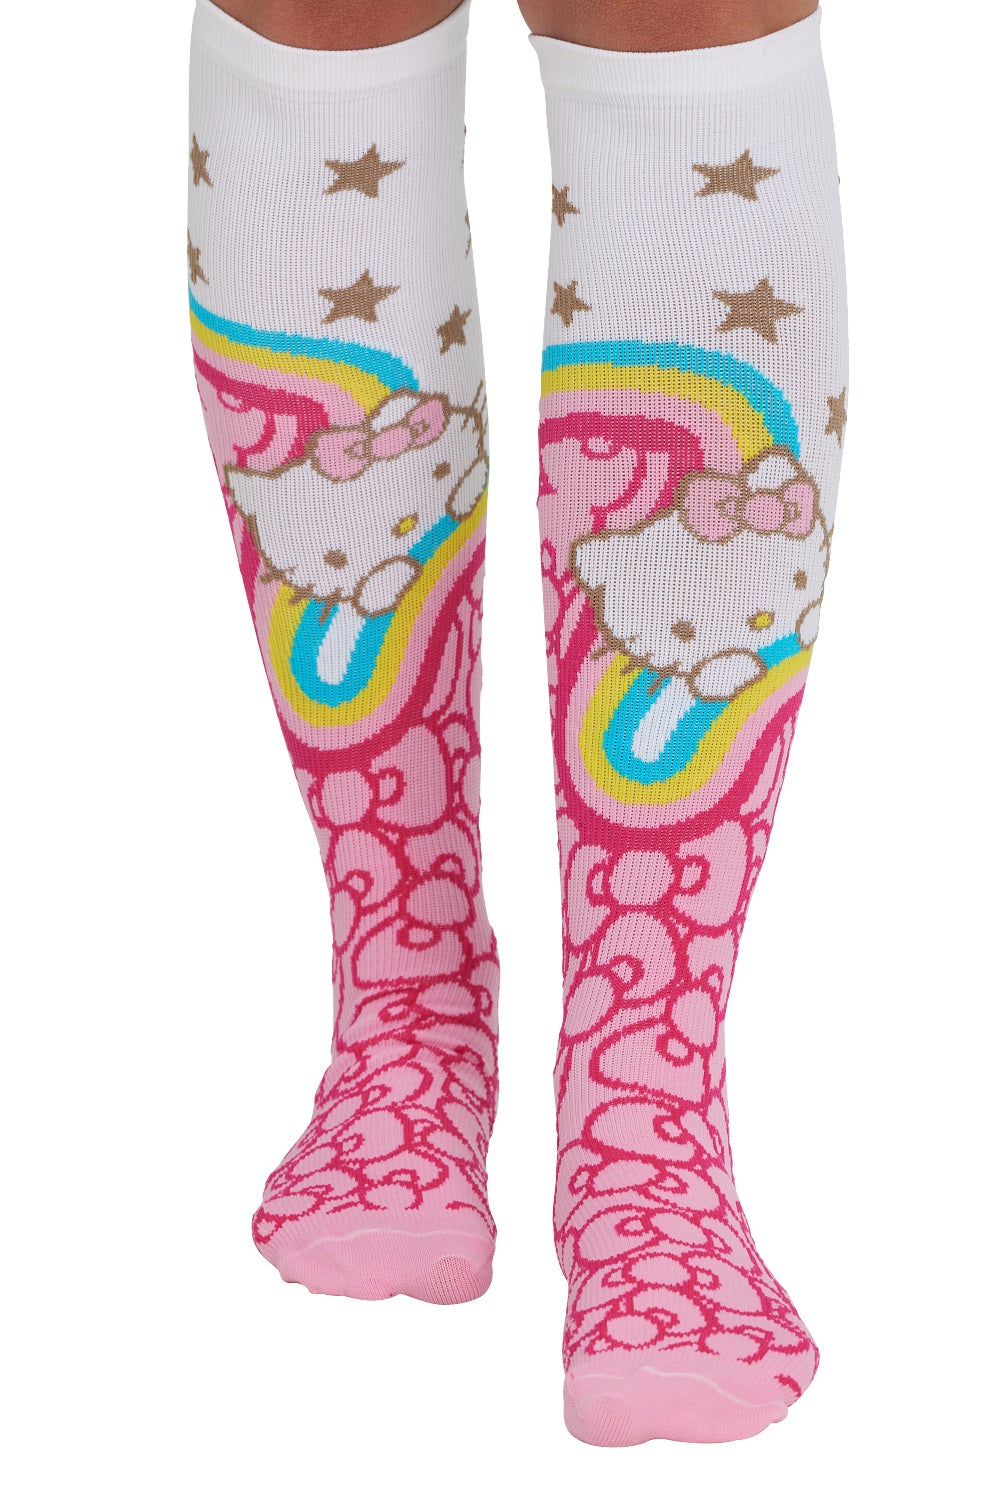 Cherokee Heart Support Mild Compression Socks 8-12 mmHg Hello Rainbow at Parker's Clothing and Shoes